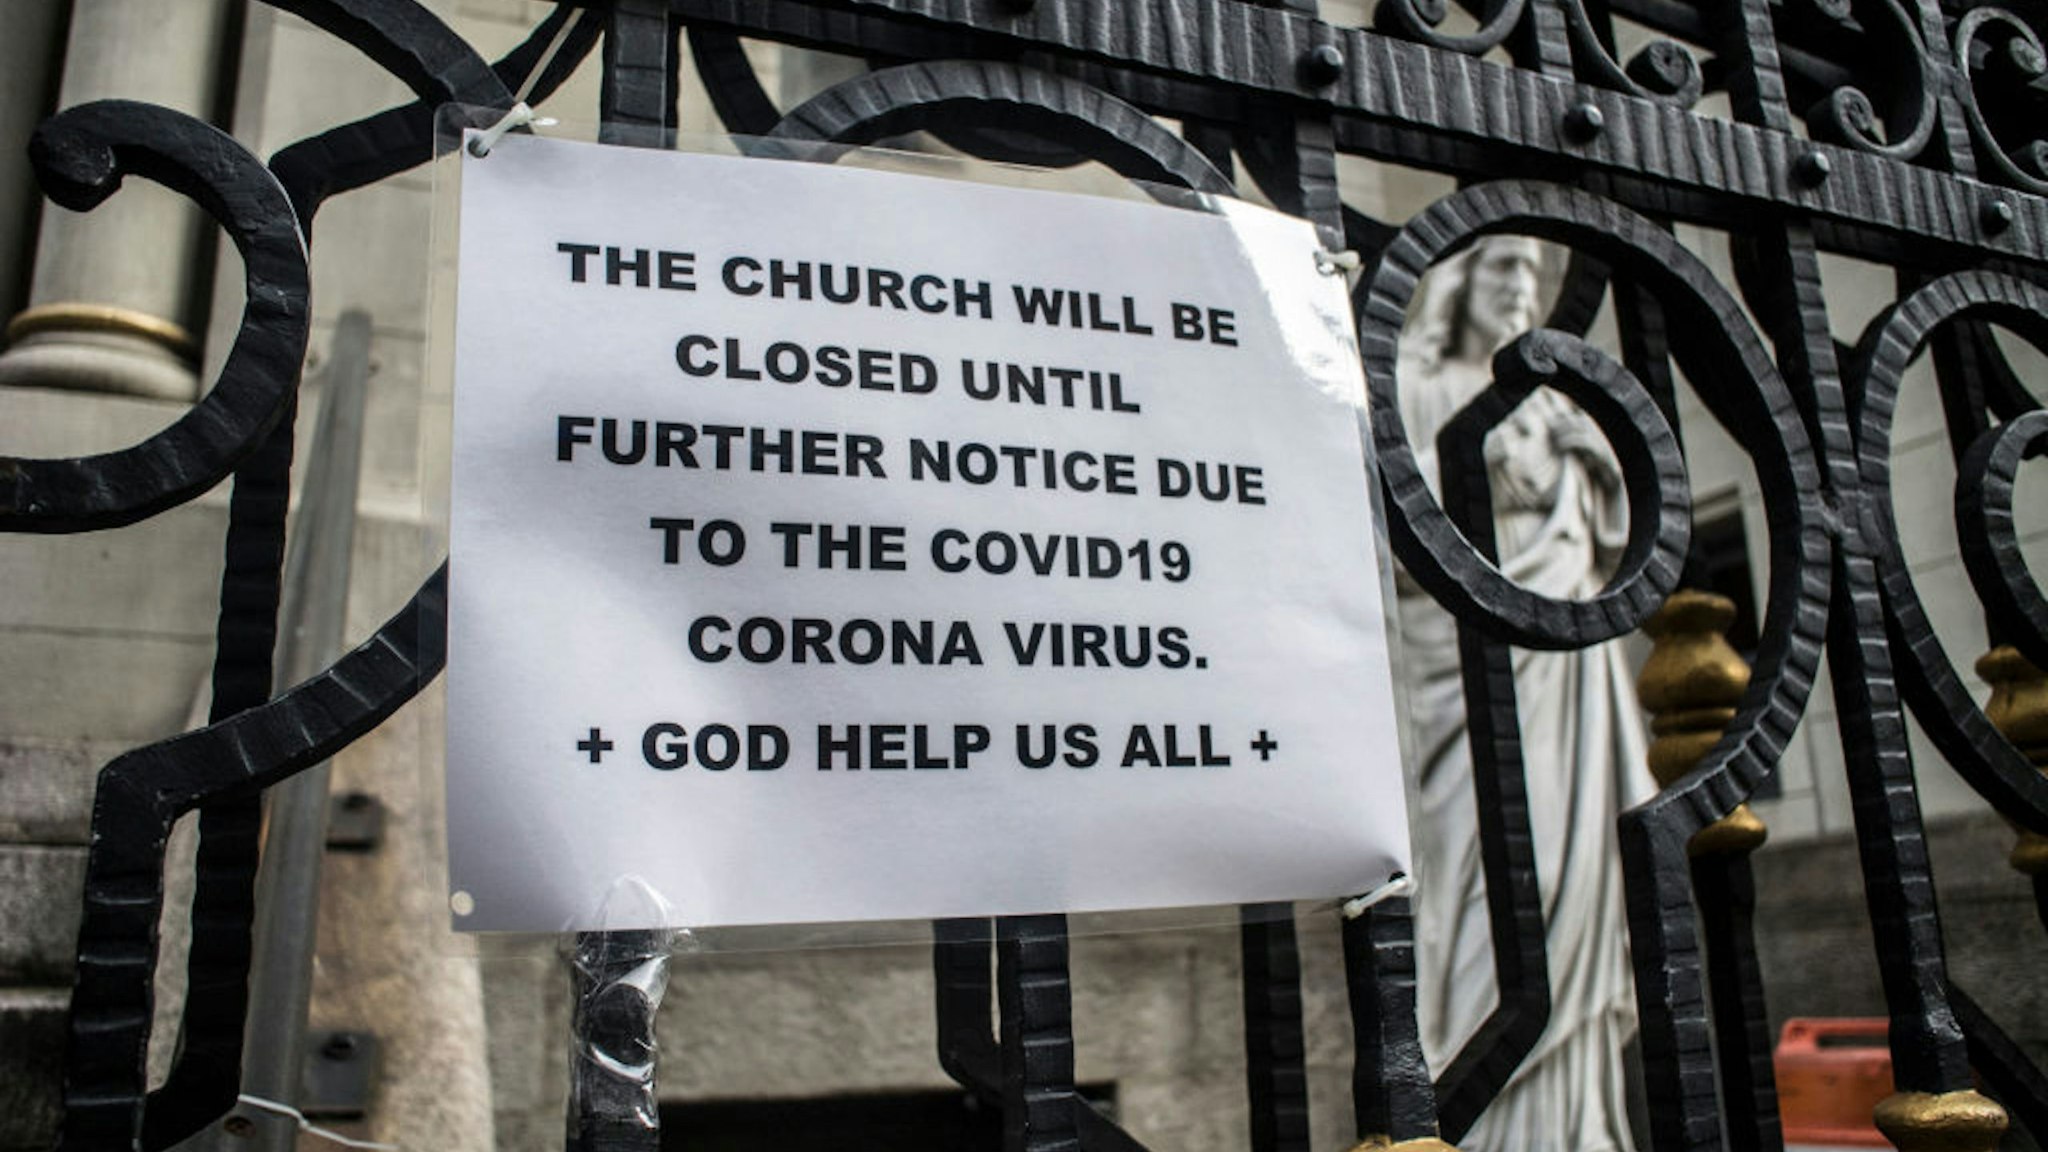 NEW YORK, NY - March 18 MANDATORY CREDIT Bill Tompkins/Getty Images Church closing due to the coronavirus COVID-19 pandemic on March 18, 2020 in New York City.